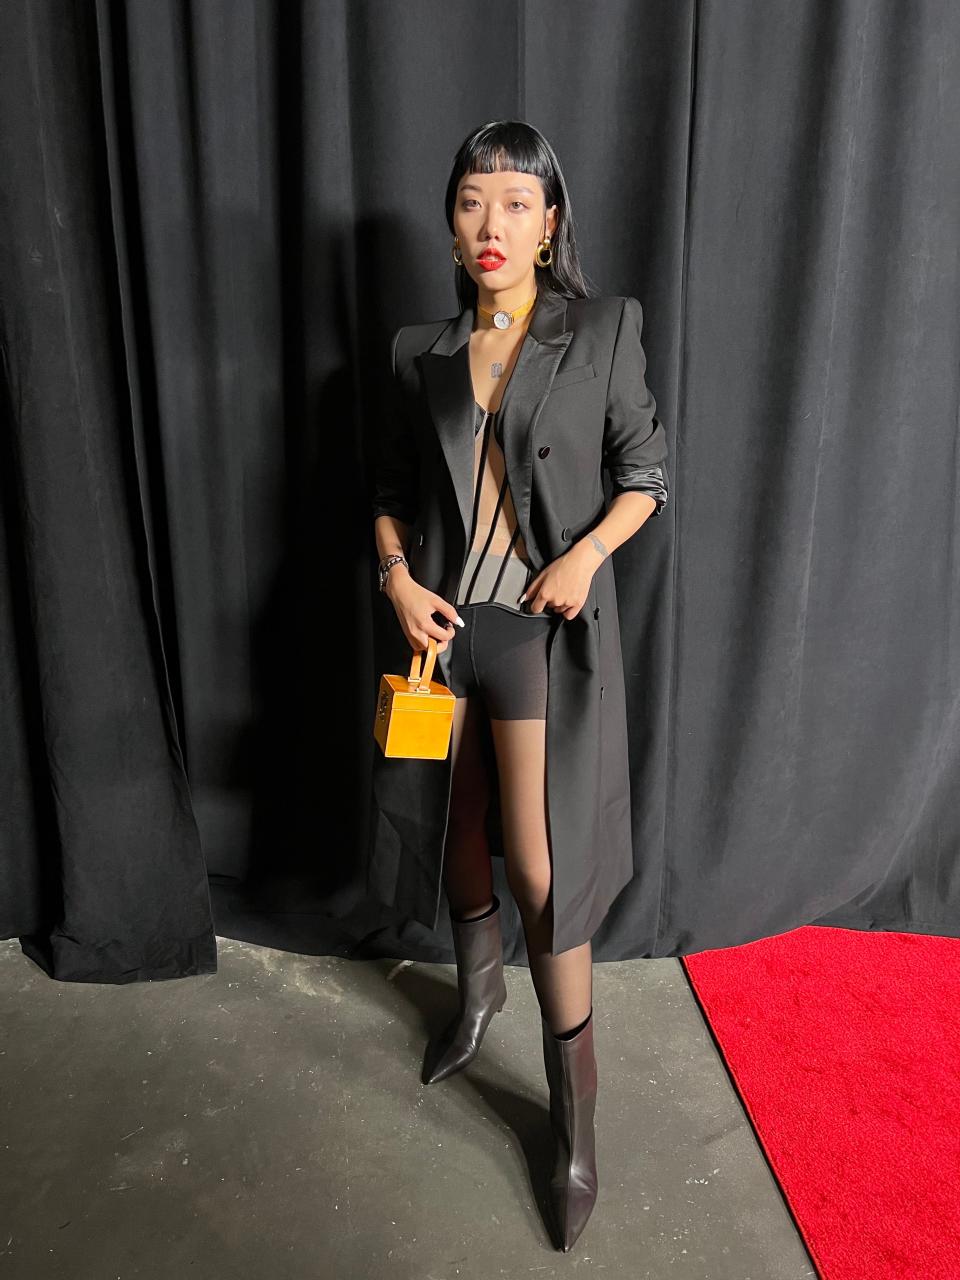 Michelle Song at New York Fashion Week 2023.